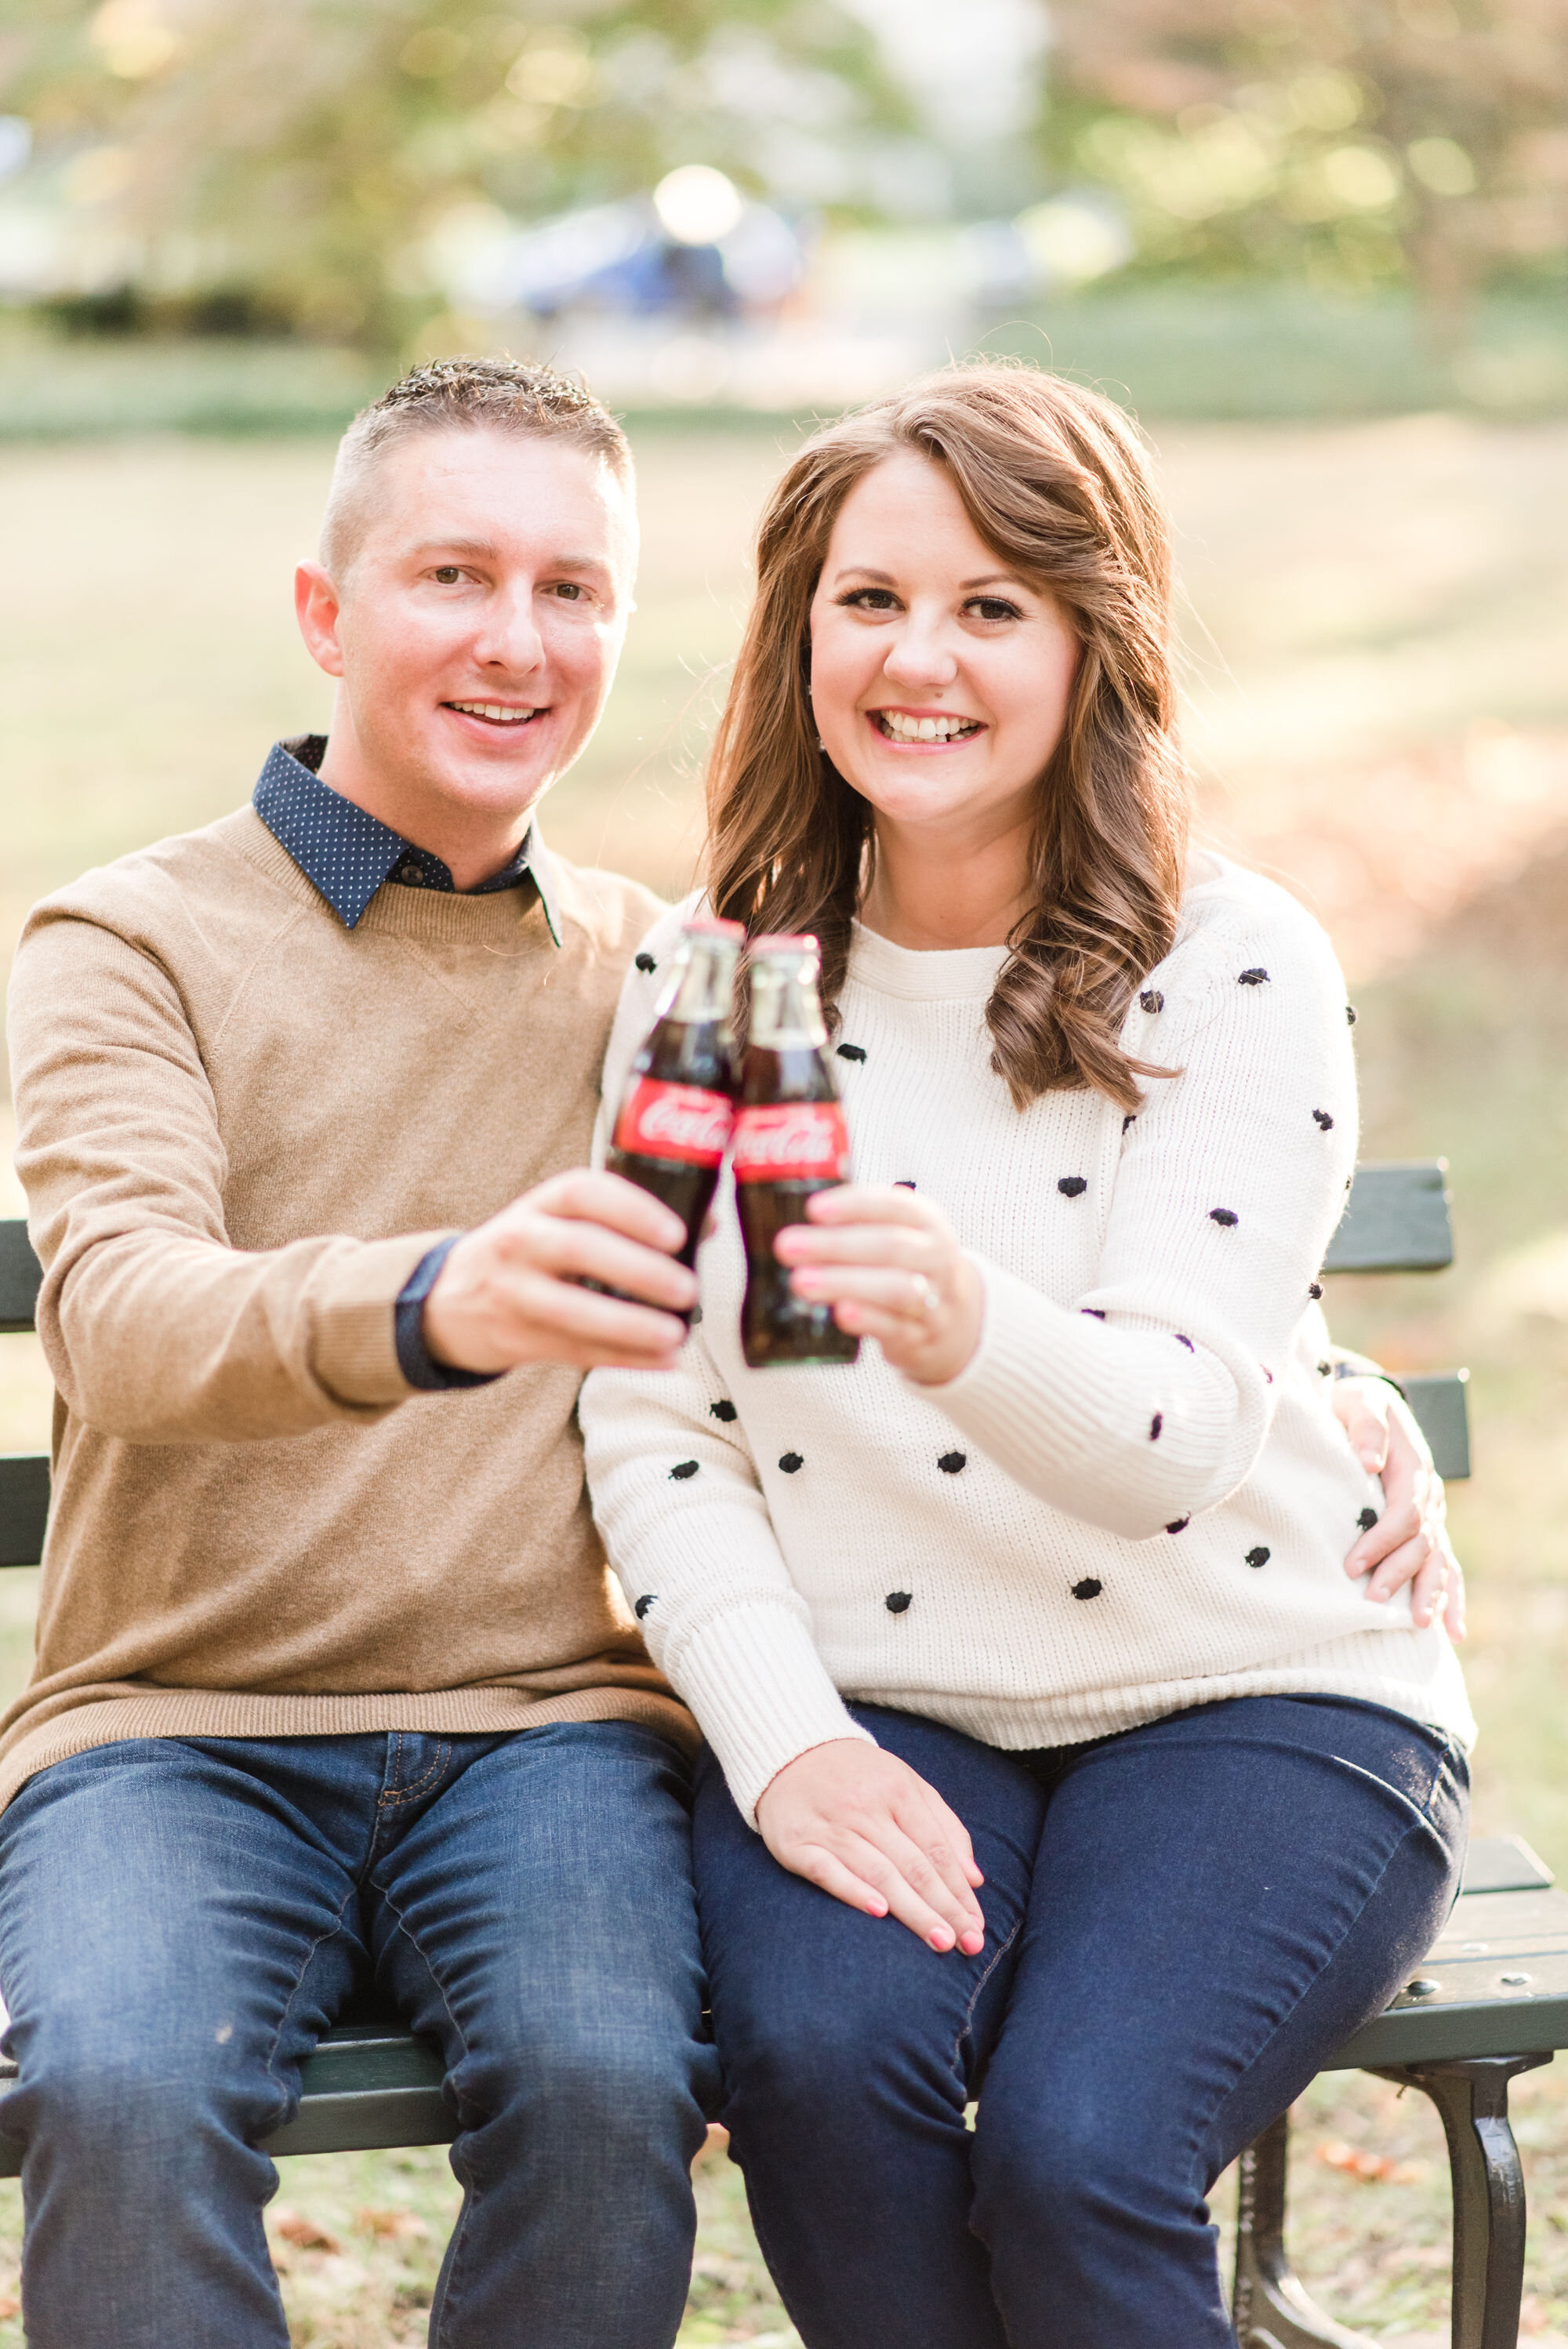 katie-gallagher-photography-louisville-old-louisville-engagement-session-55.jpg